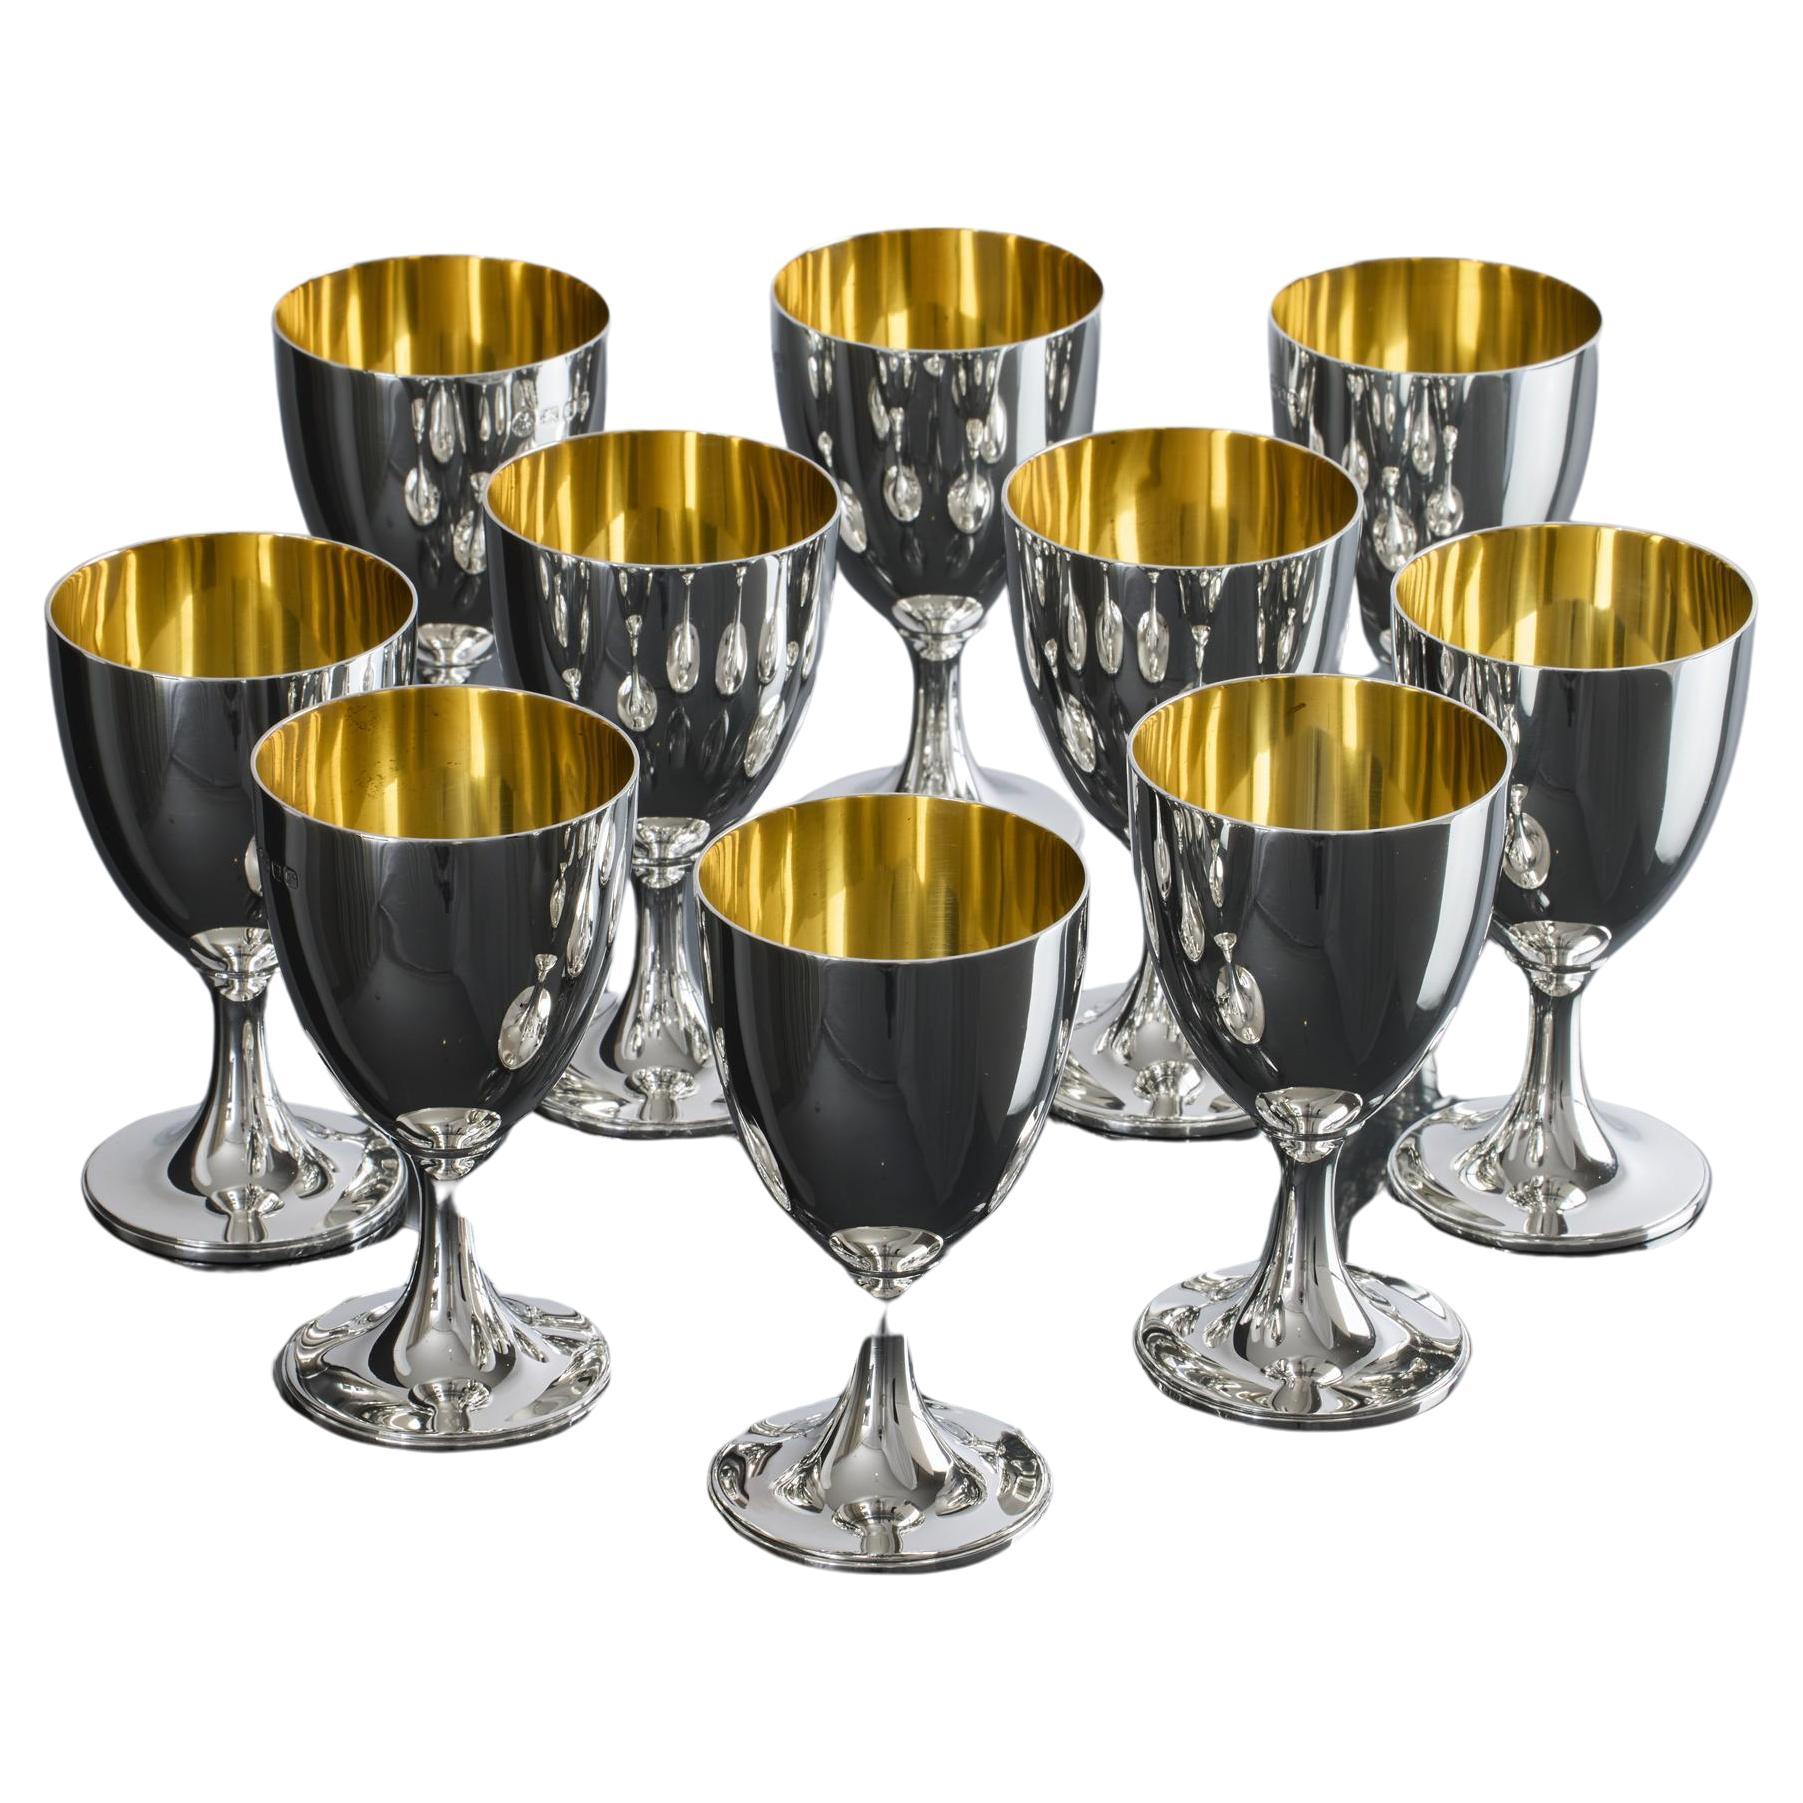 Set of eight gilt-lined silver wine goblets